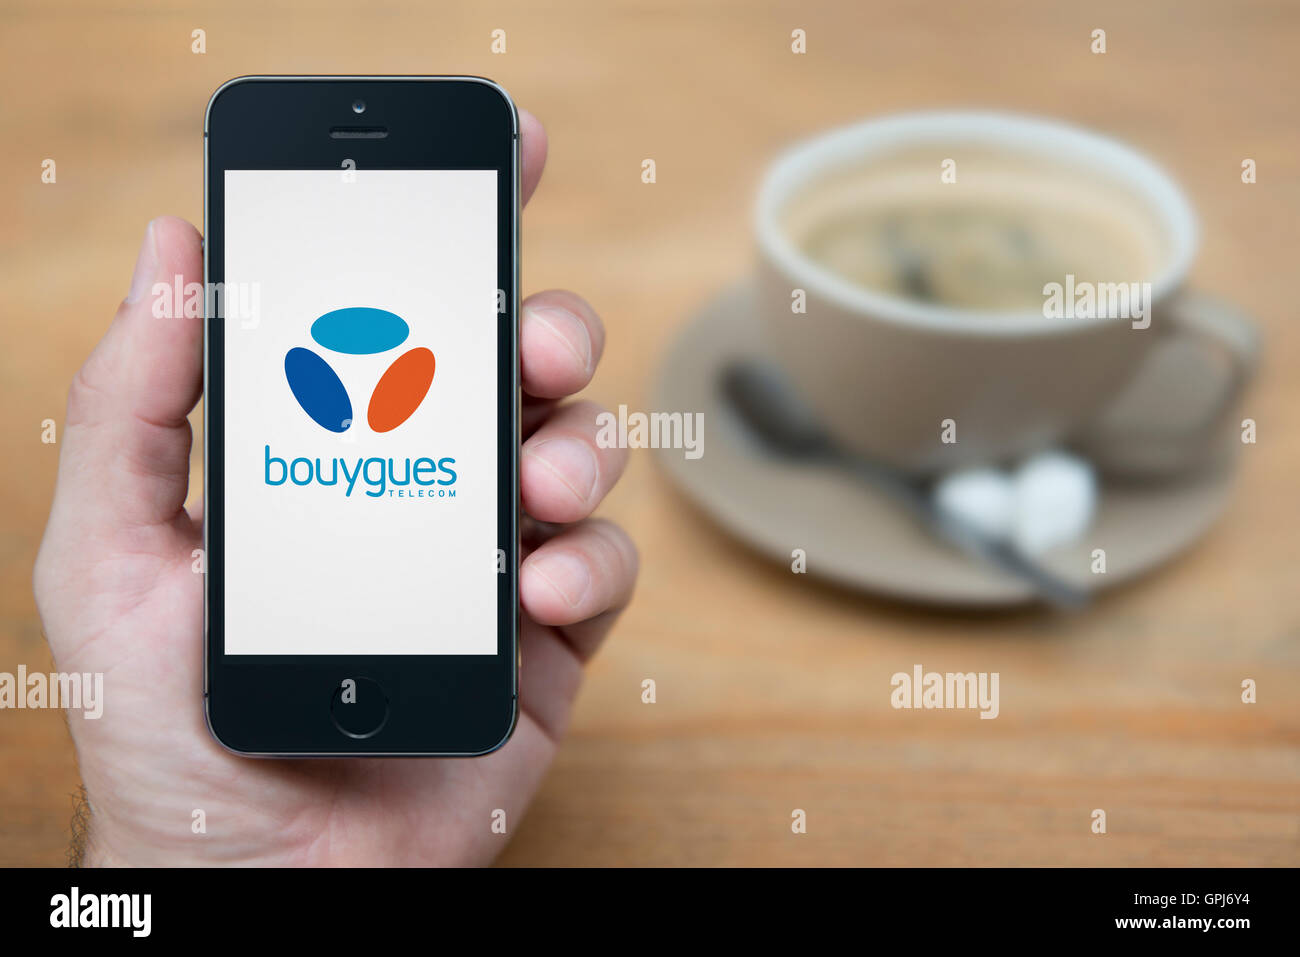 A man looks at his iPhone showing the Bouygues Telecom telecommunications operator logo, with coffee (Editorial use only). Stock Photo